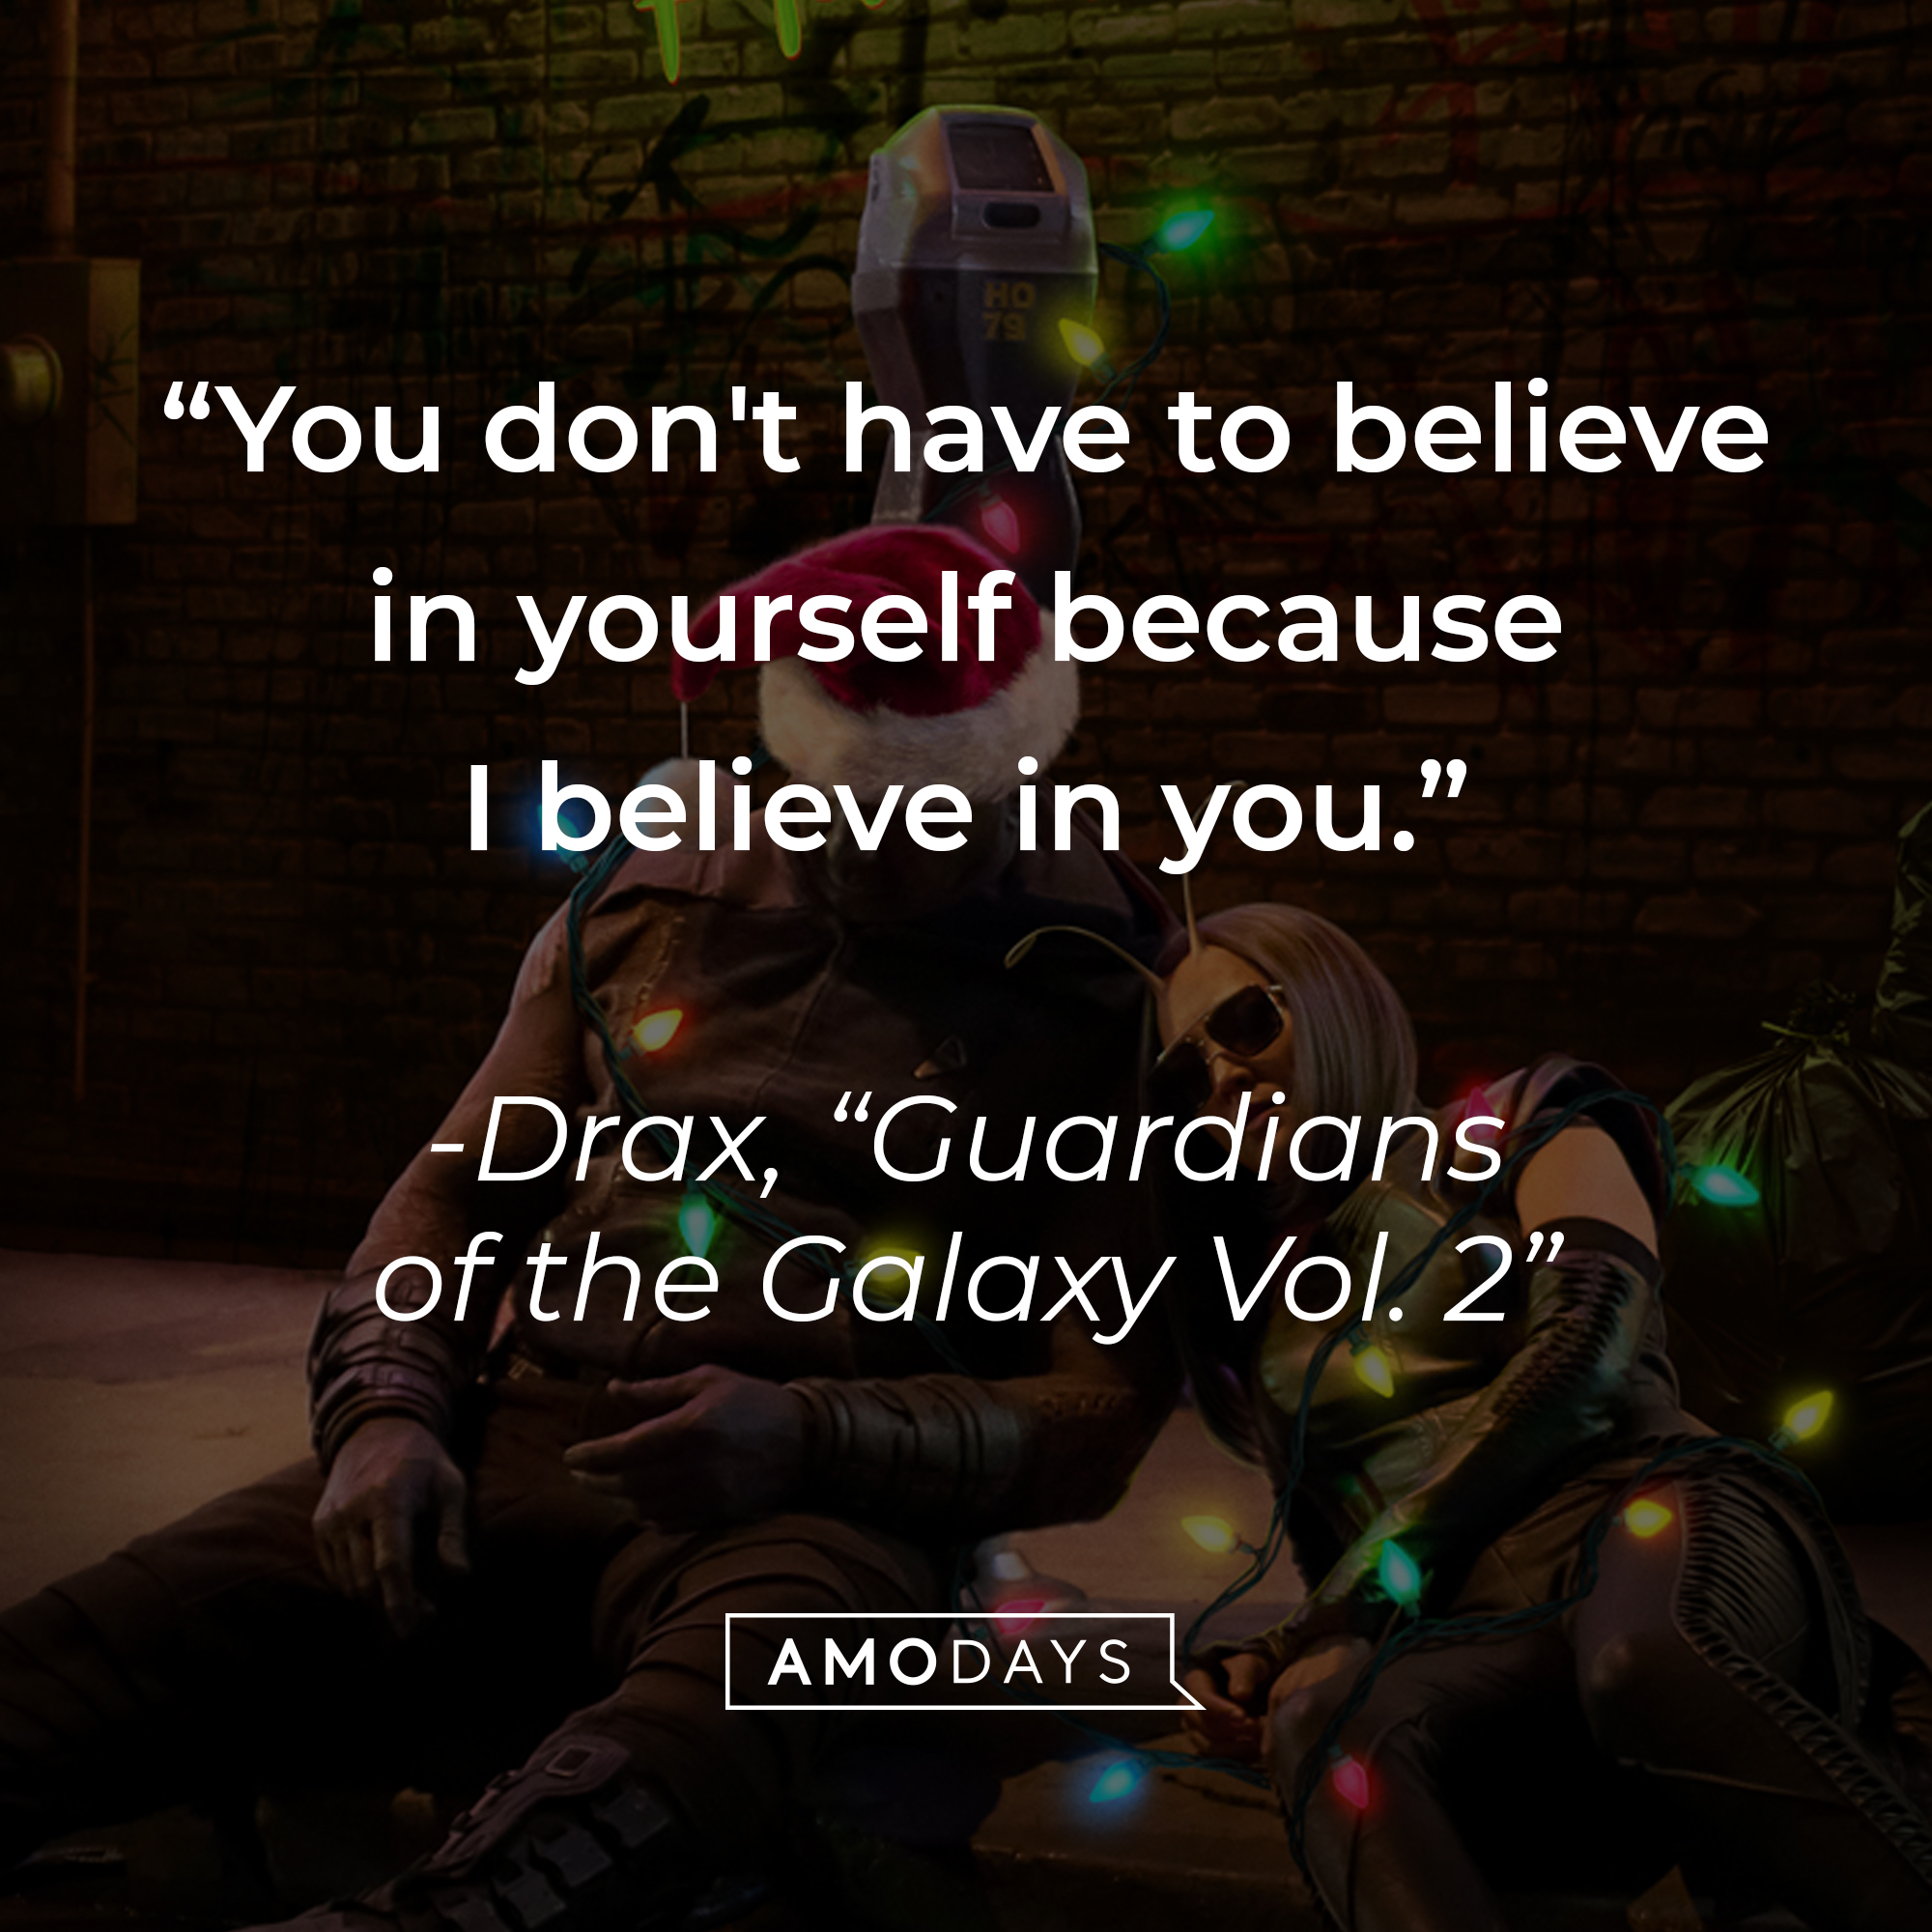 Drax with his quote: "You don't have to believe in yourself because I believe in you." | Source: Facebook.com/guardiansofthegalaxy